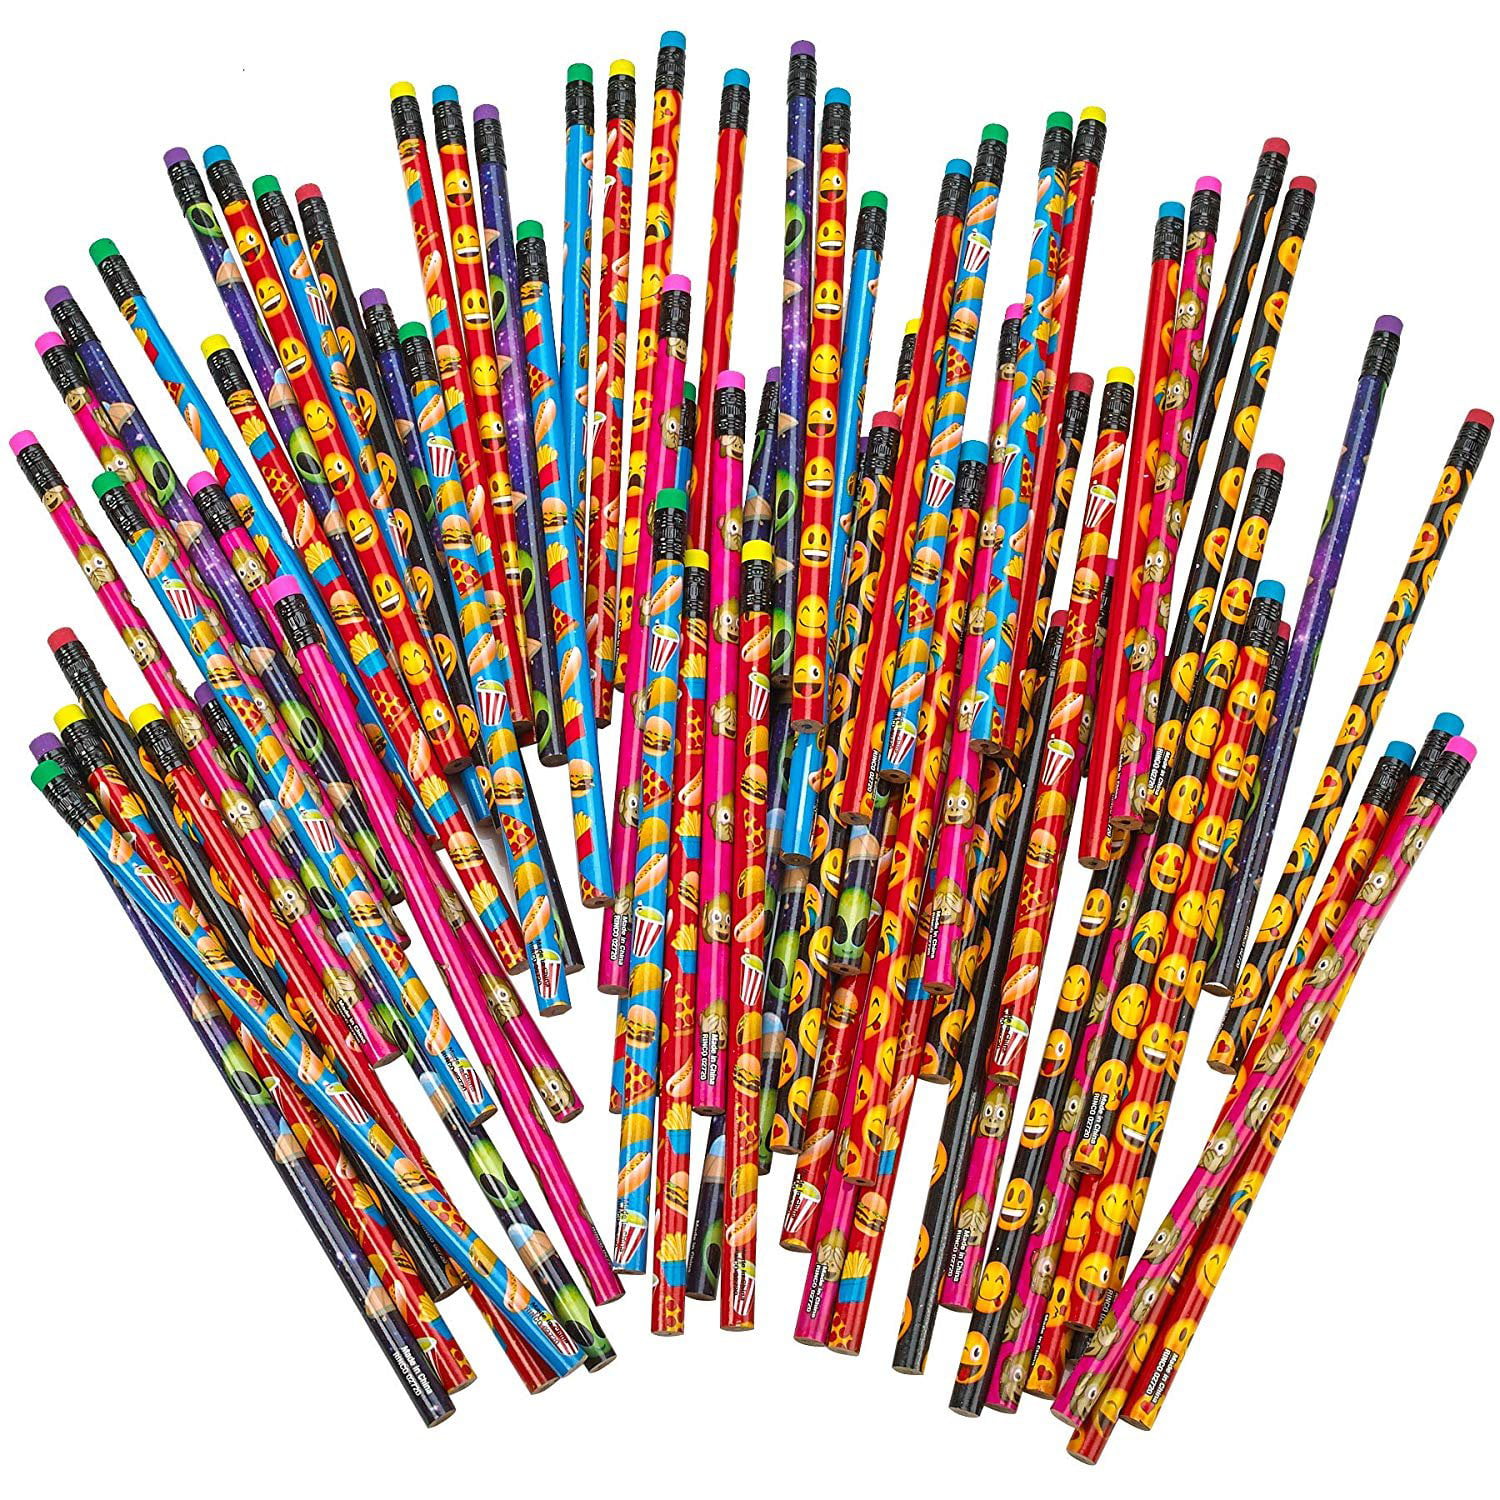 Awards and Incentives Kicko Emoticon Pencil Assortment 72 Rewards 7.5 inch Exciting School Supplies Assorted Colorful Pencils for Kids Trendy Emoji Favors 